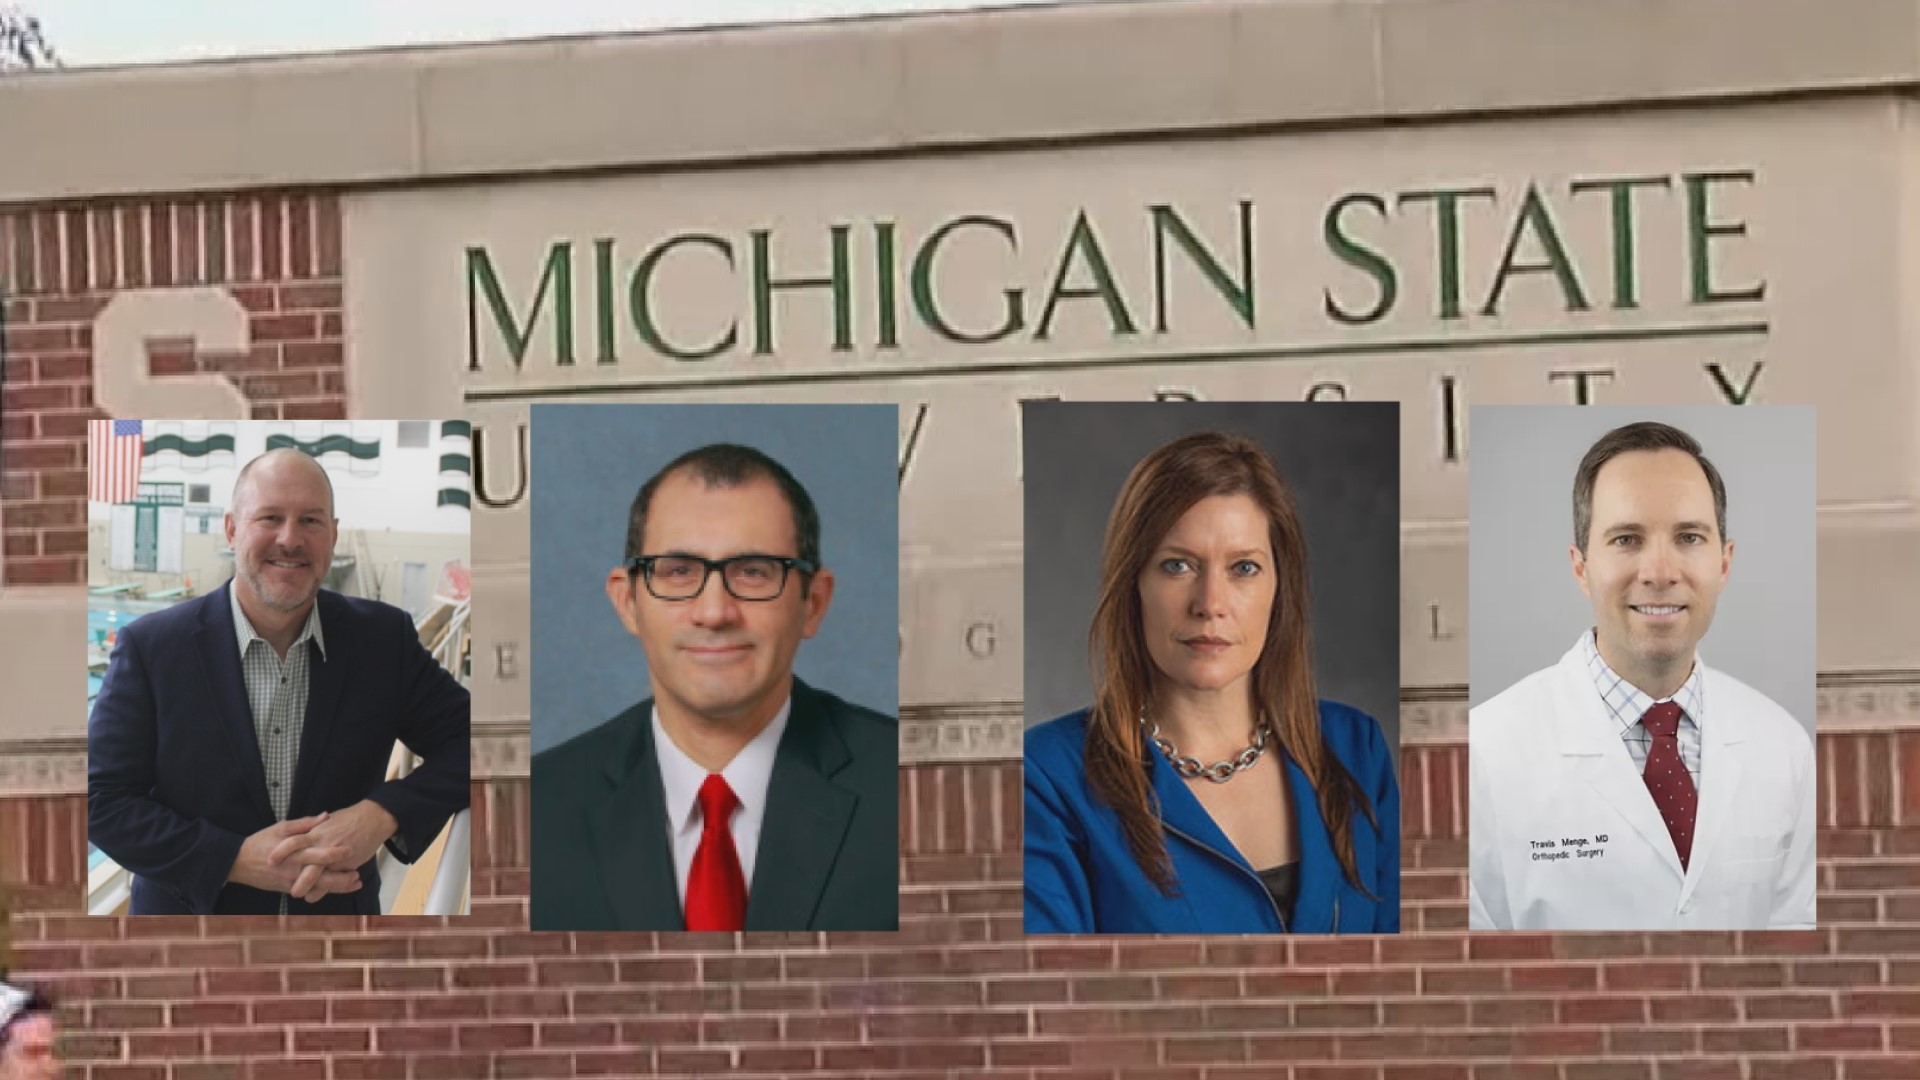 In a few weeks, voters will decide who will fill two open spots on the embattled Michigan State University board of trustees.